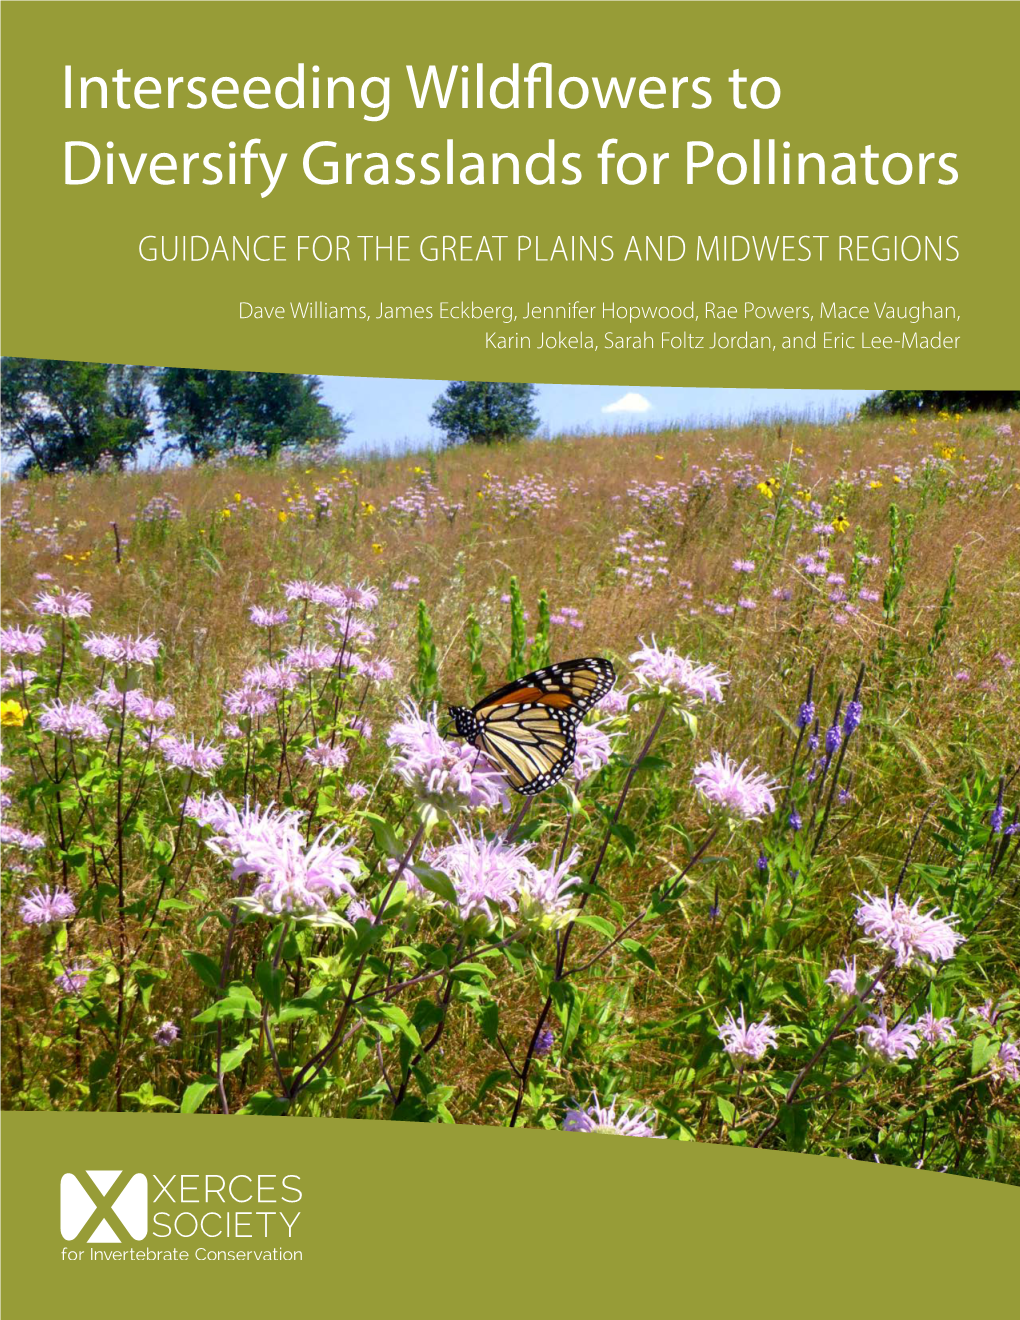 Interseeding Wildflowers to Diversify Grasslands for Pollinators GUIDANCE for the GREAT PLAINS and MIDWEST REGIONS